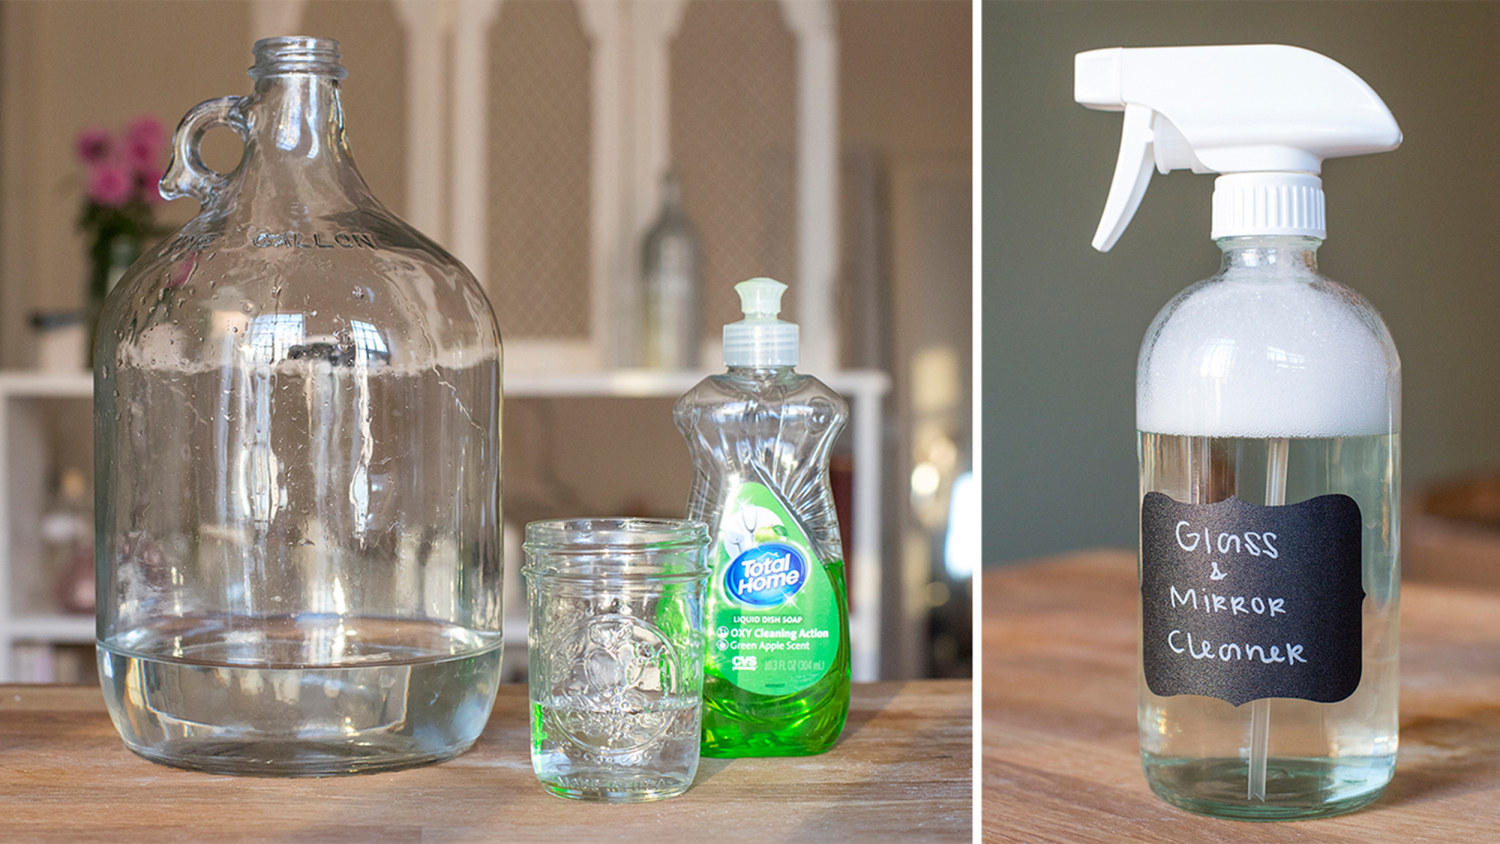 DIY glass and mirror cleaner you can make in 60 seconds